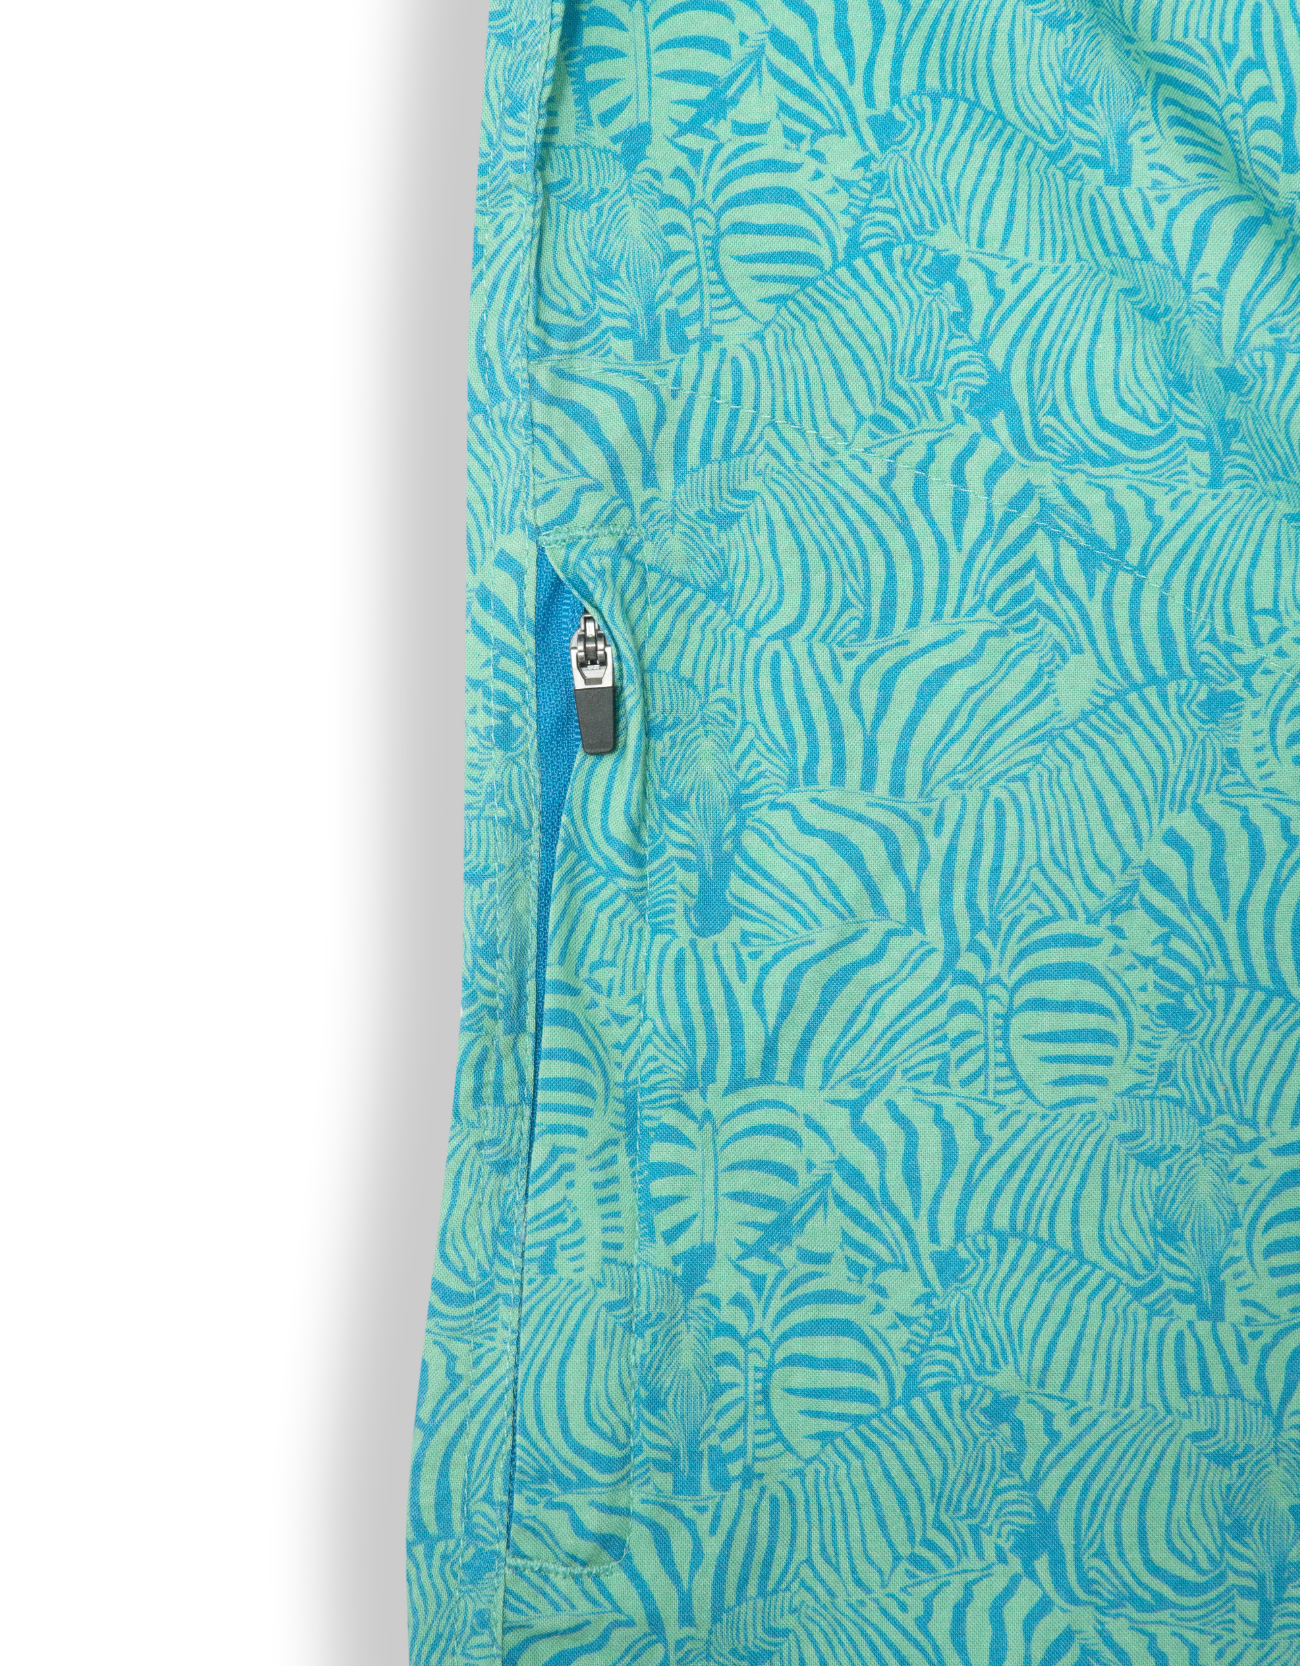 TOO MANY LINES - TURQUOISE ZEBRA  7-SEAS™ BUTTON UP by Bajallama